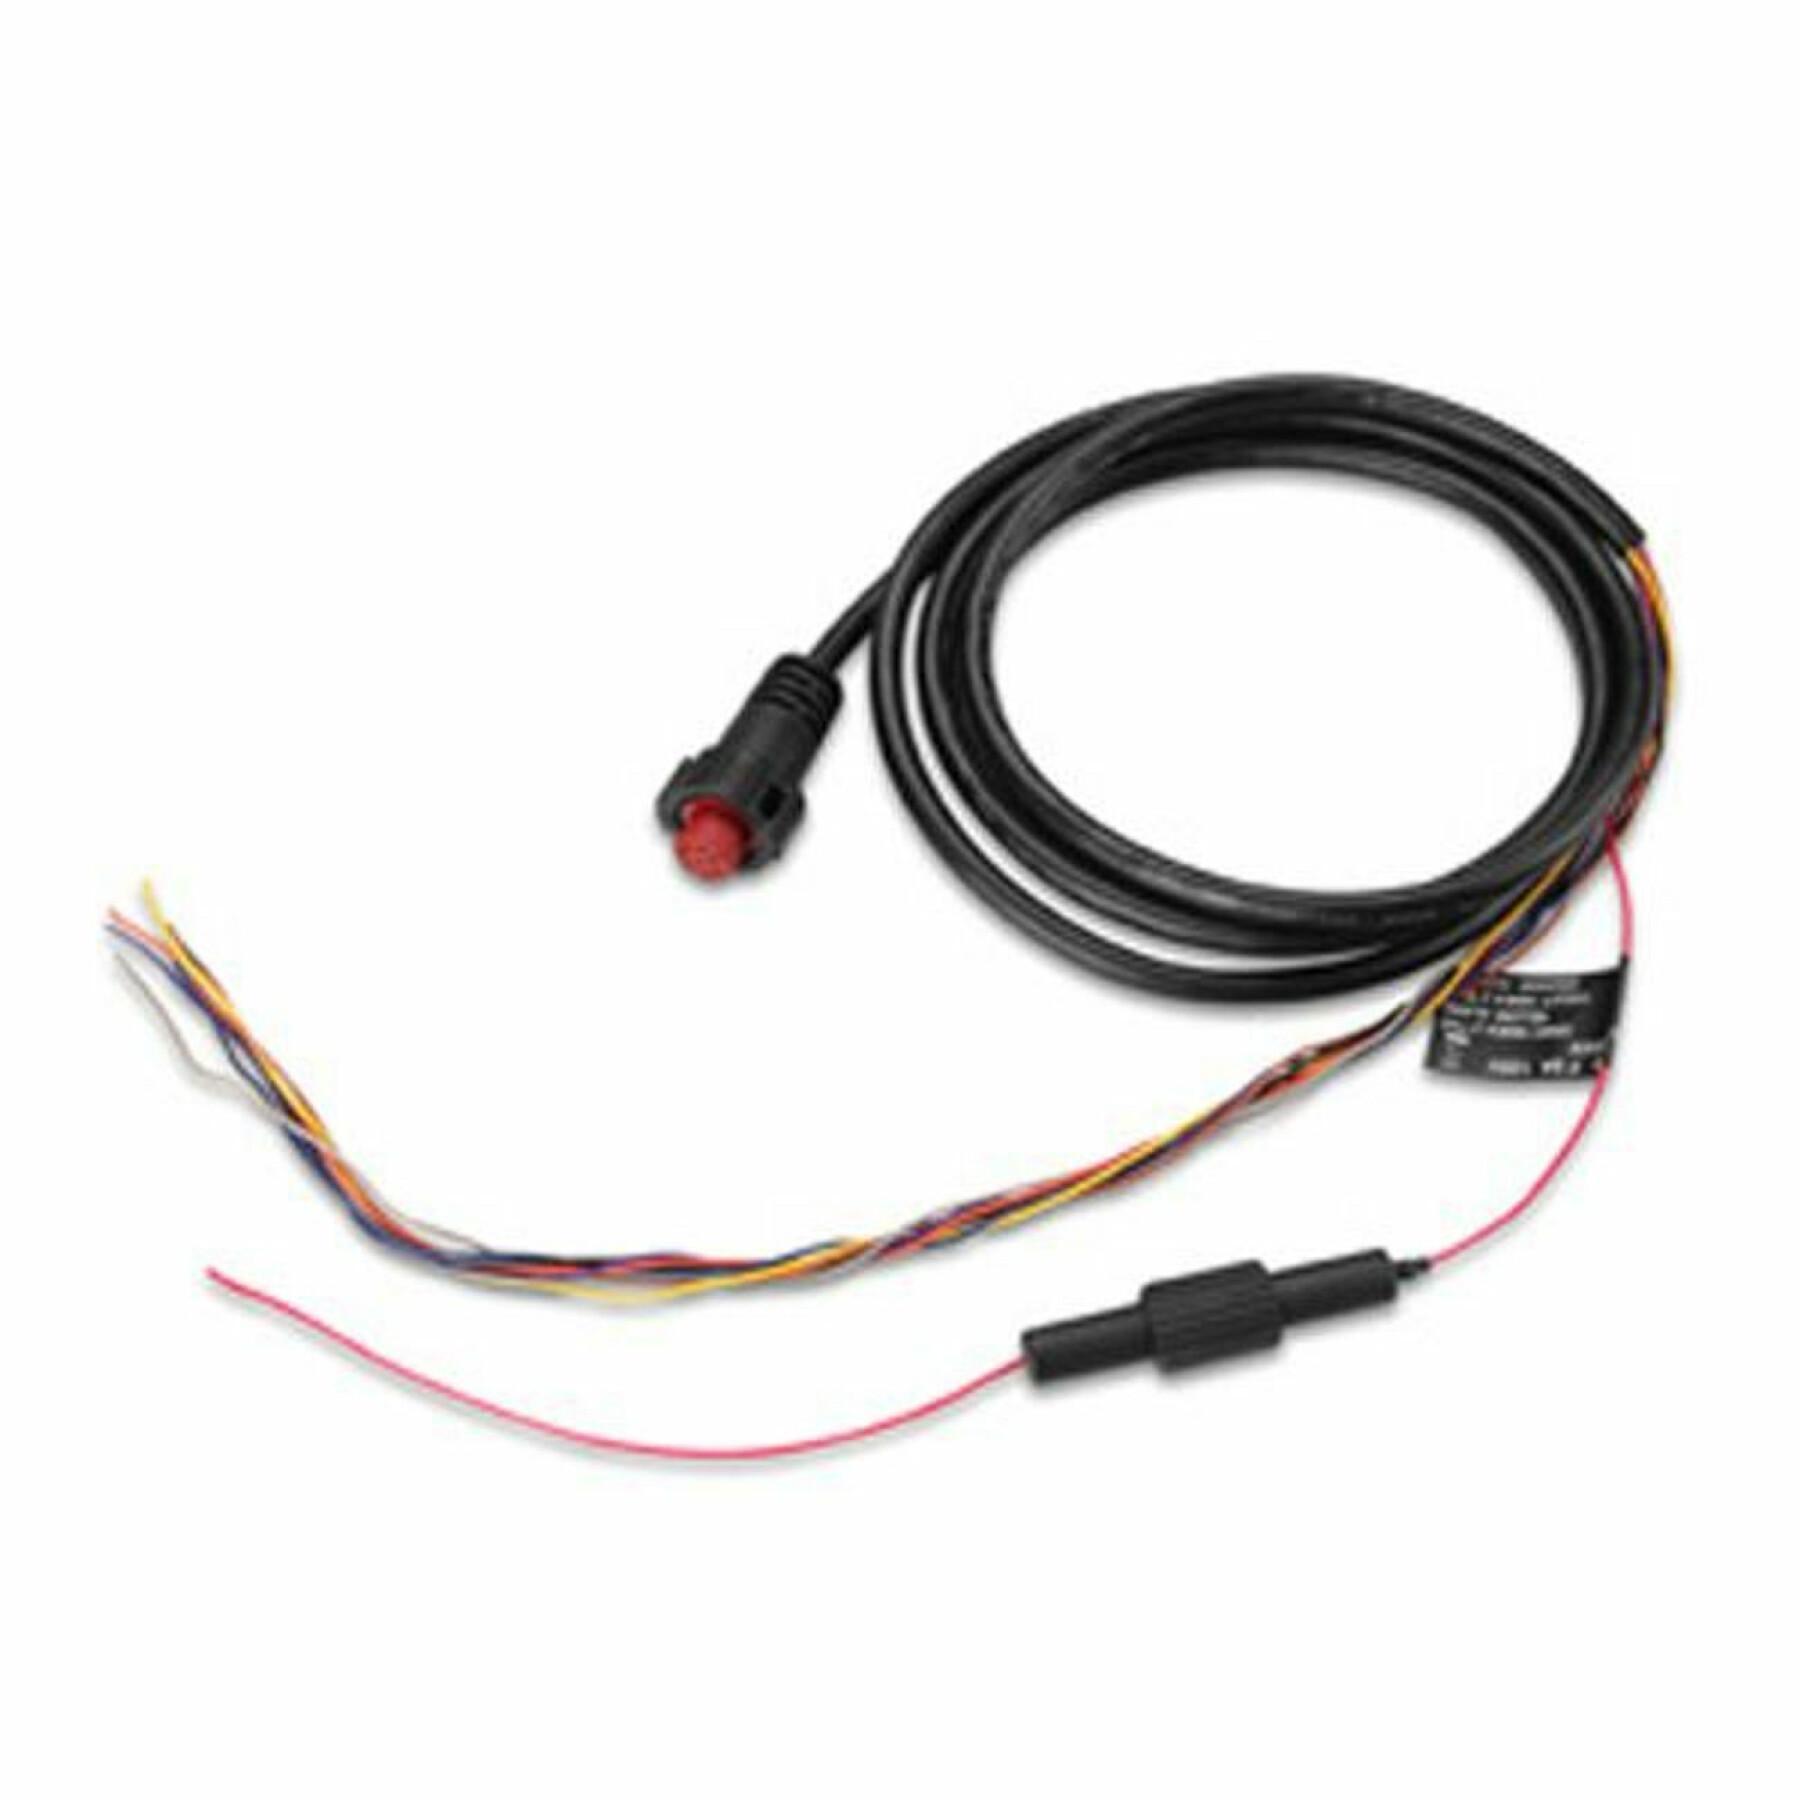 Cable Garmin power cable 8-pin